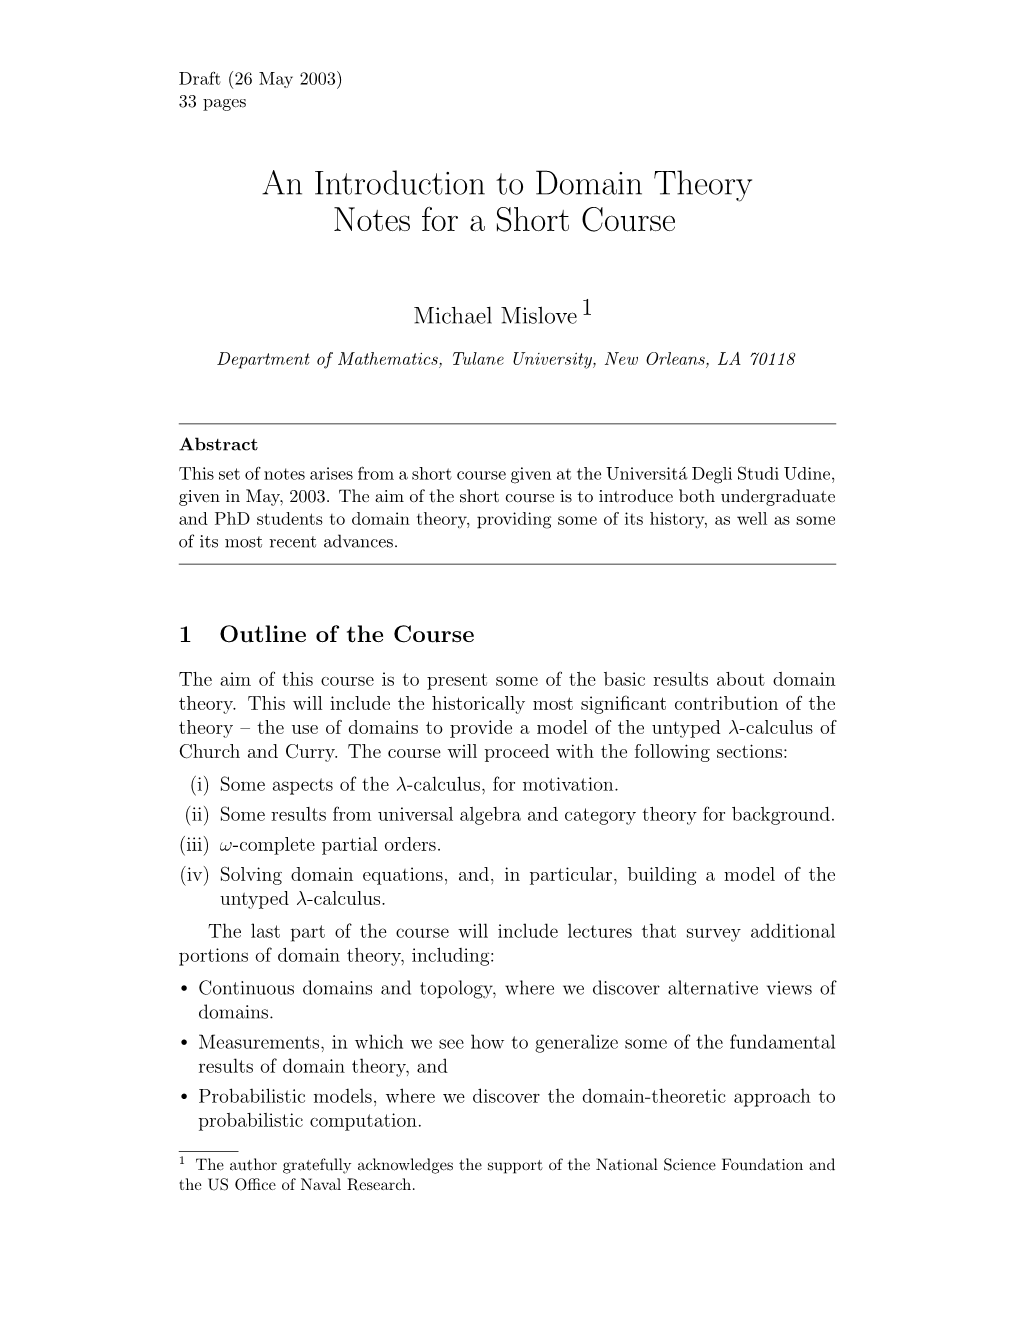 An Introduction to Domain Theory Notes for a Short Course